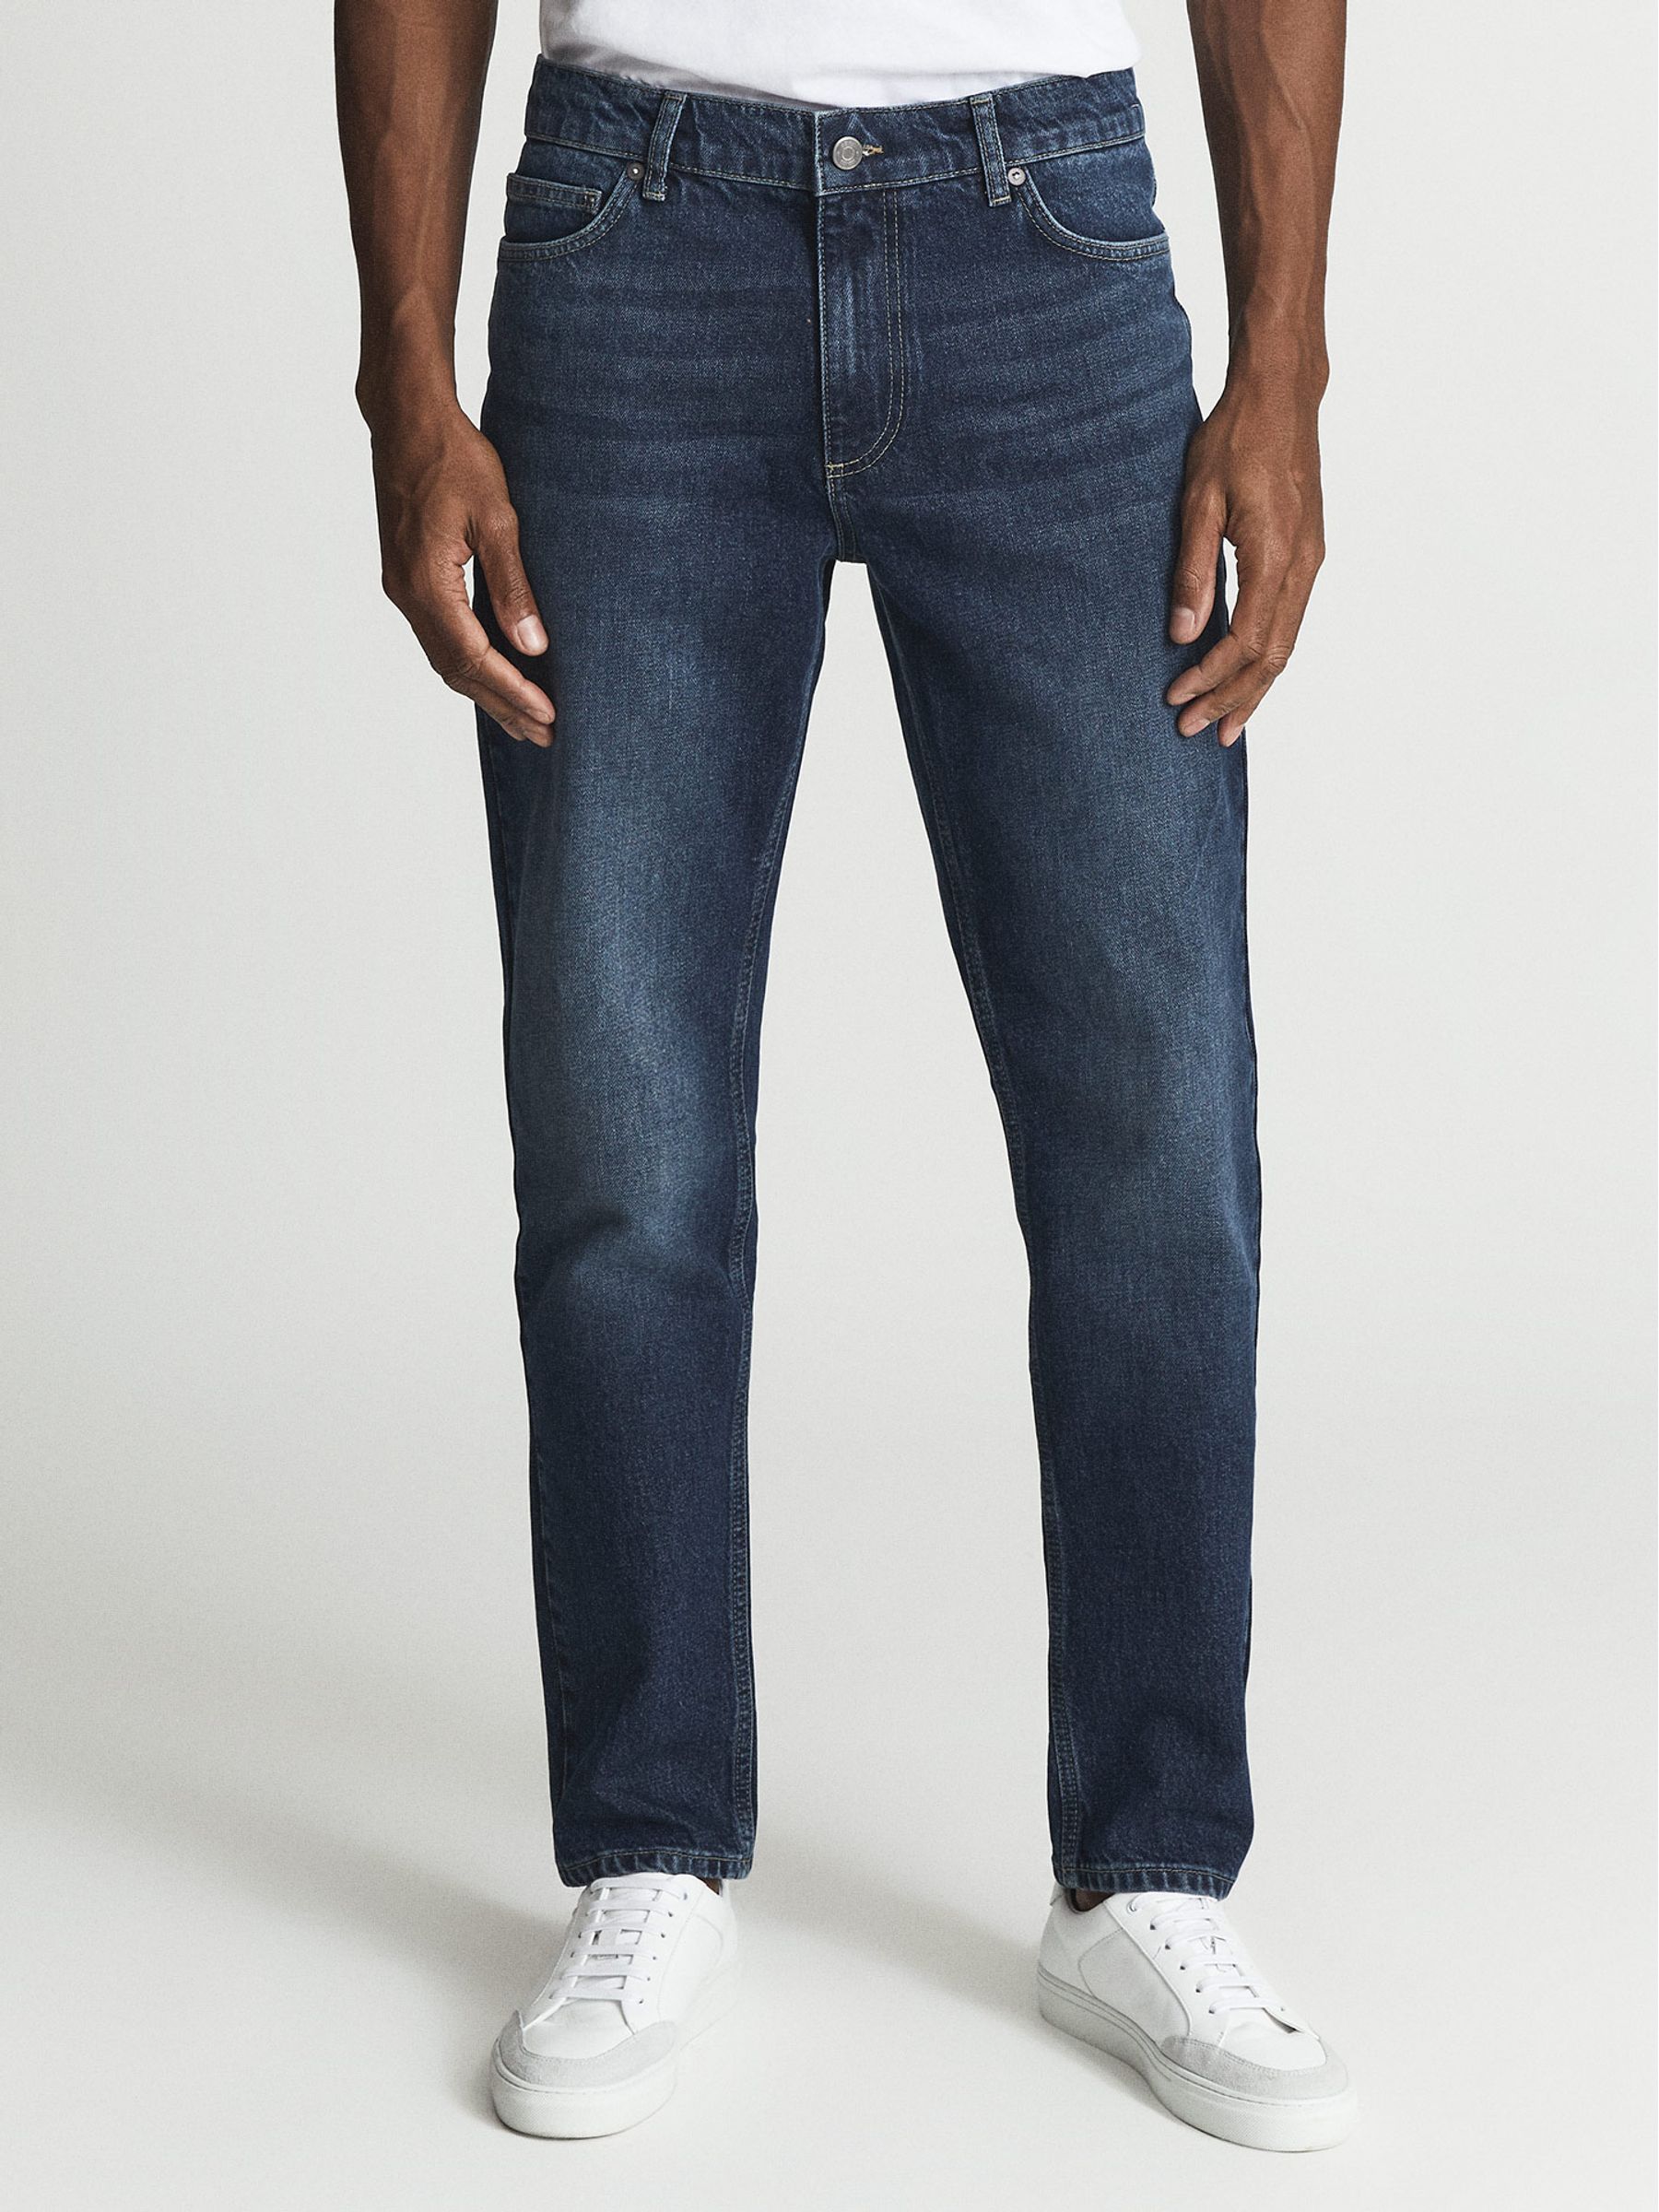 Reiss Walsh Slim Fit Washed Jeans - REISS